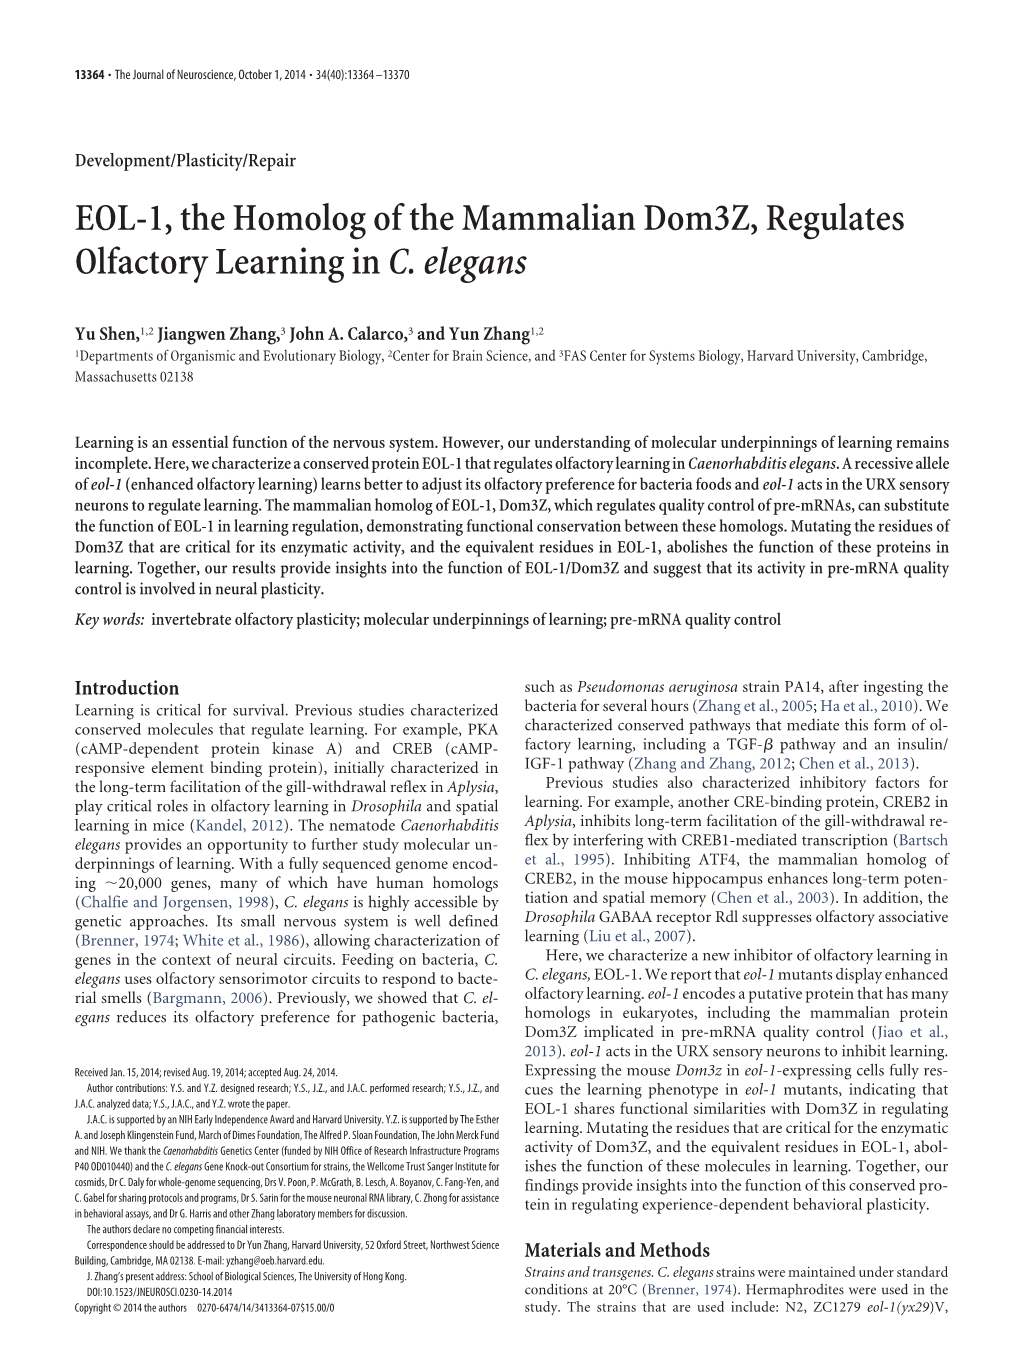 EOL-1, the Homolog of the Mammalian Dom3z, Regulates Olfactory Learning in C